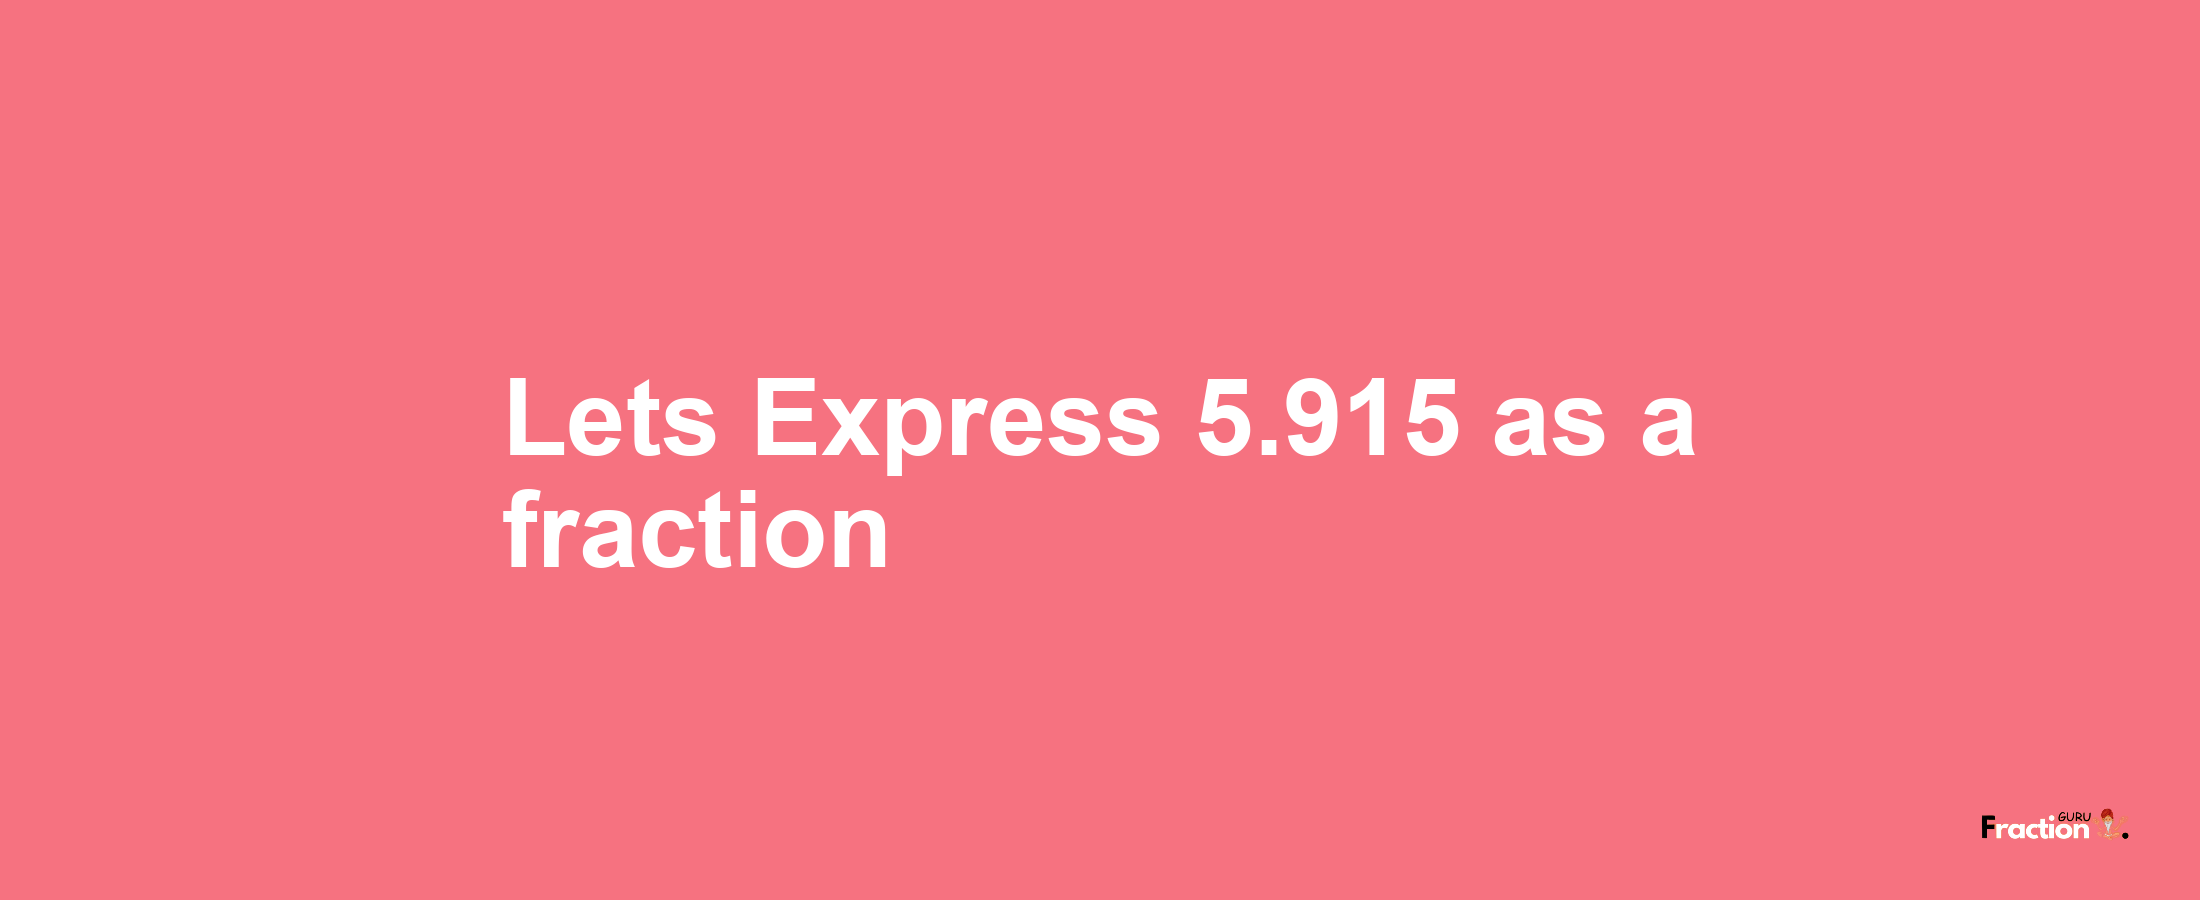 Lets Express 5.915 as afraction